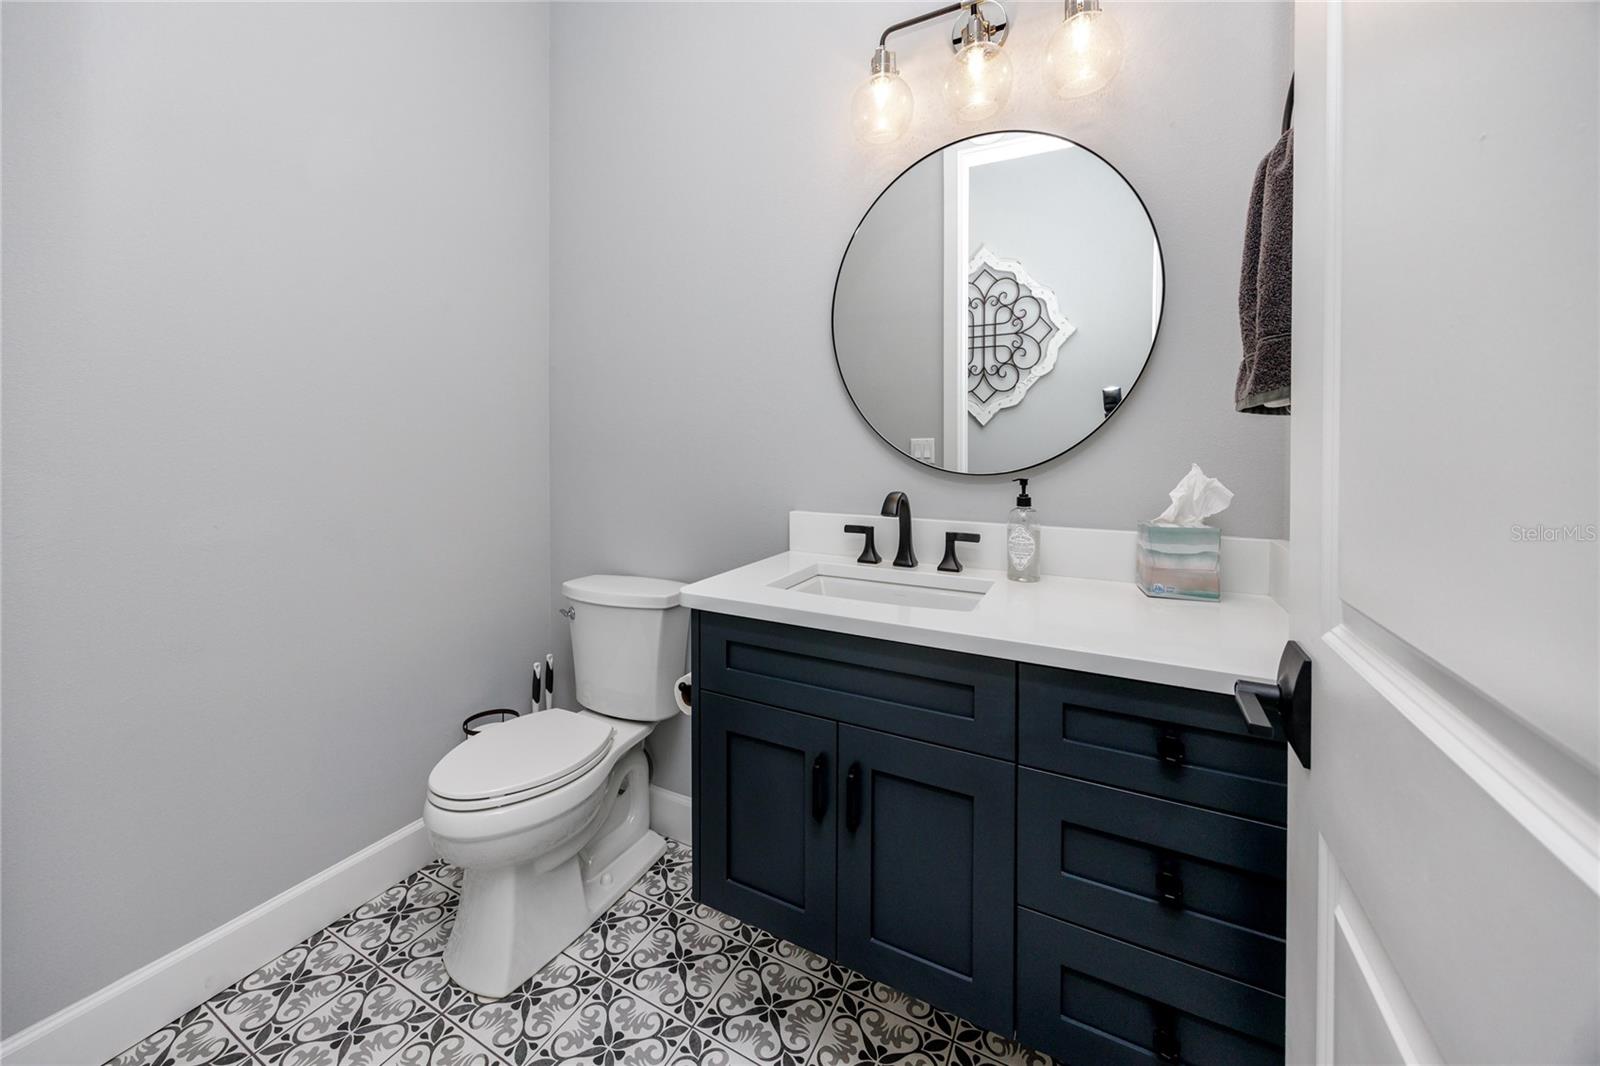 Powder room off the living room